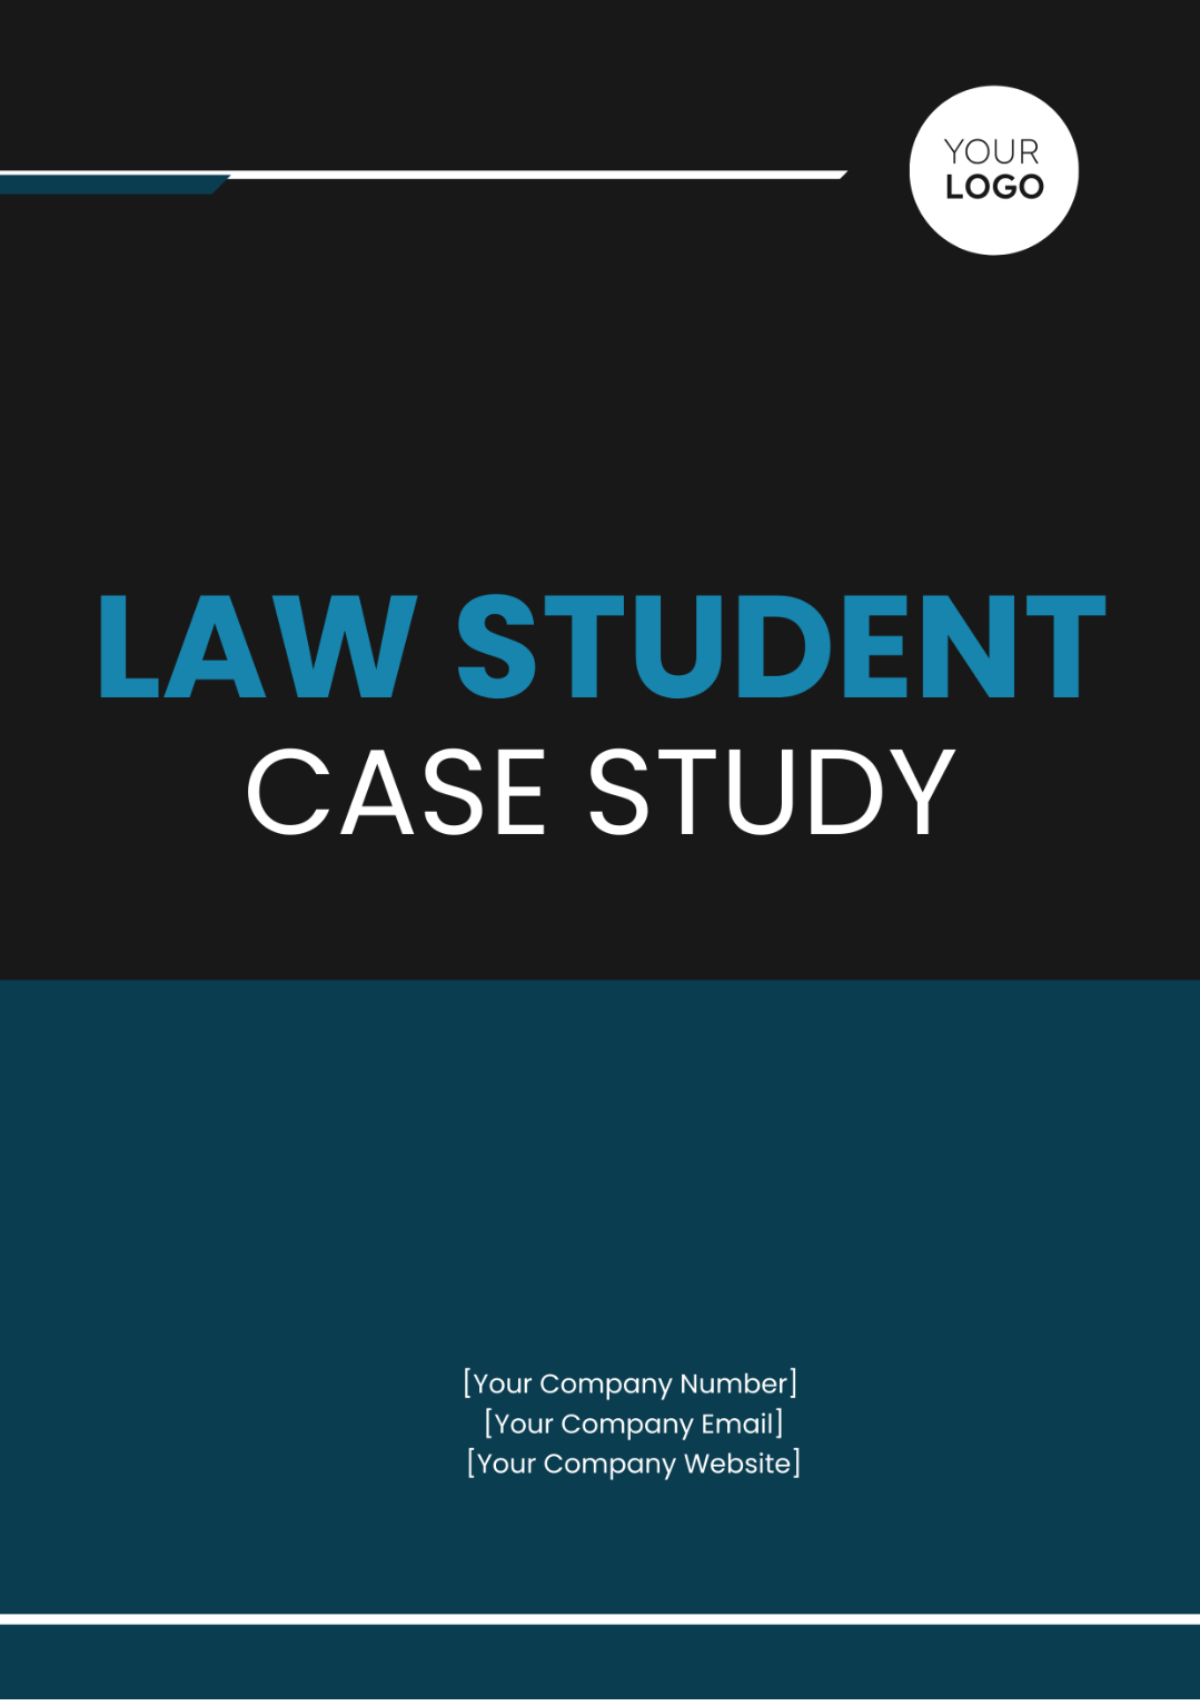 Free Law Student Case Study Template